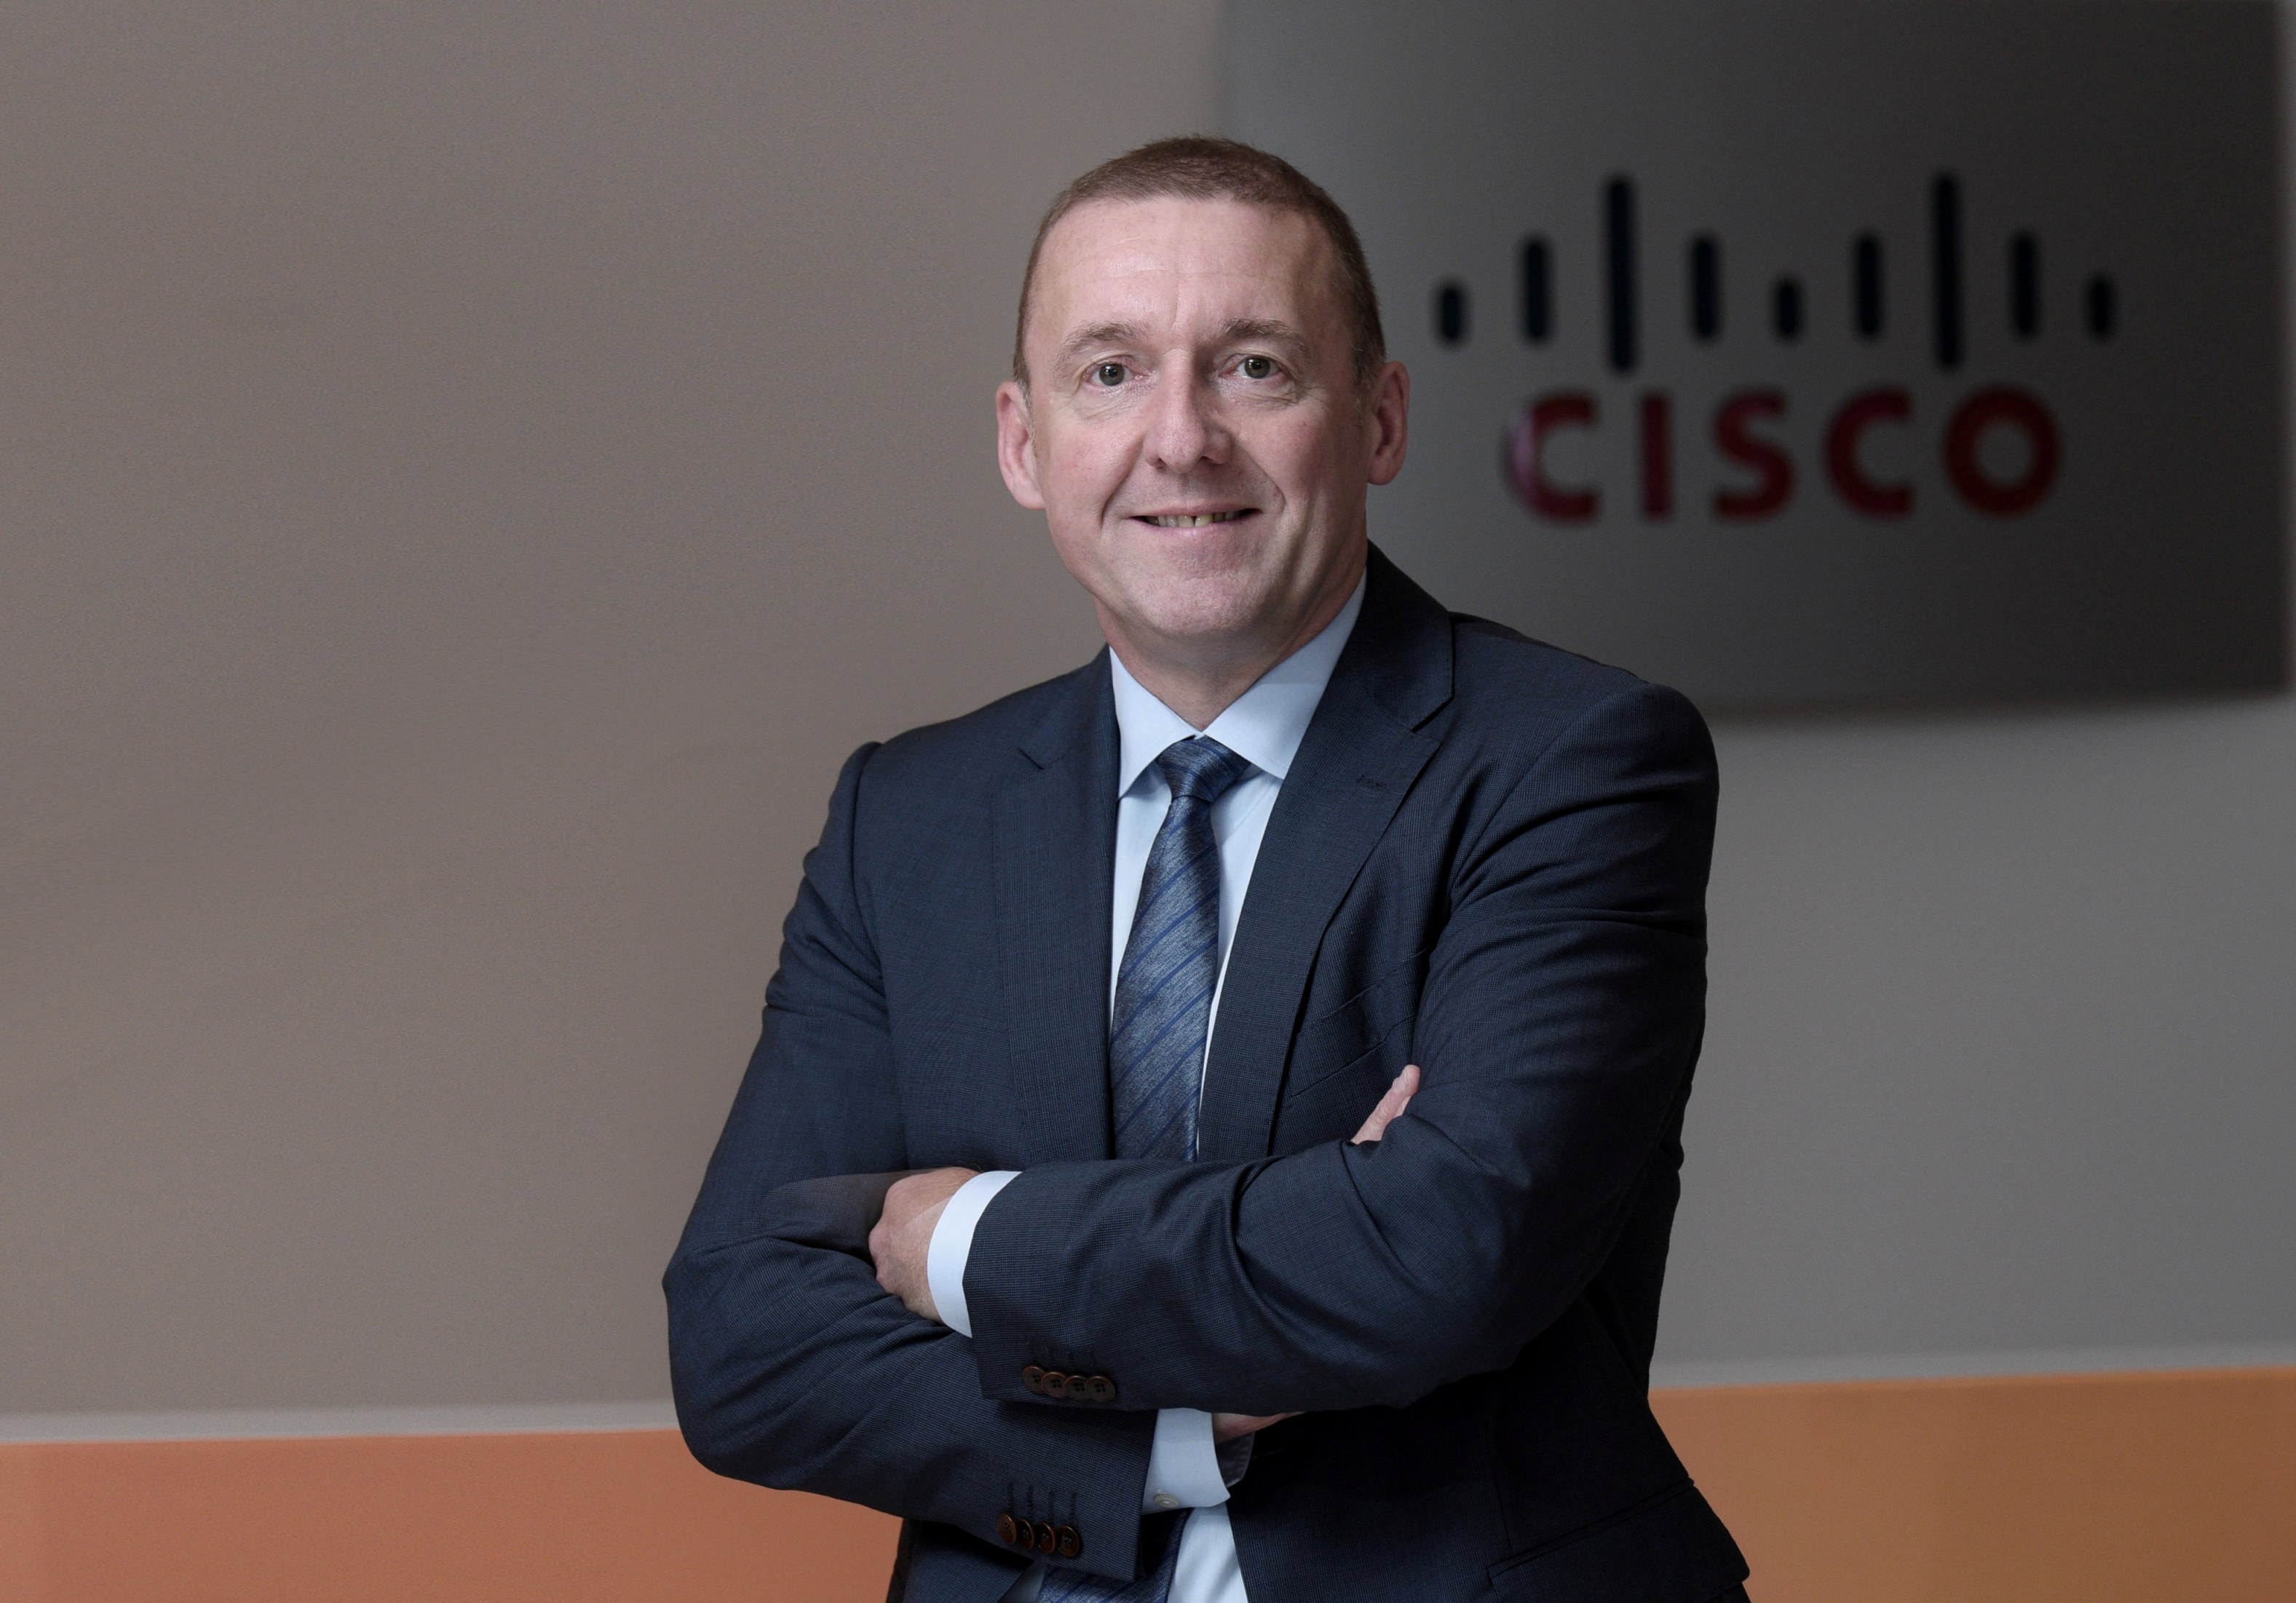 MEA to have highest growth in worldwide IP traffic, predicts Cisco